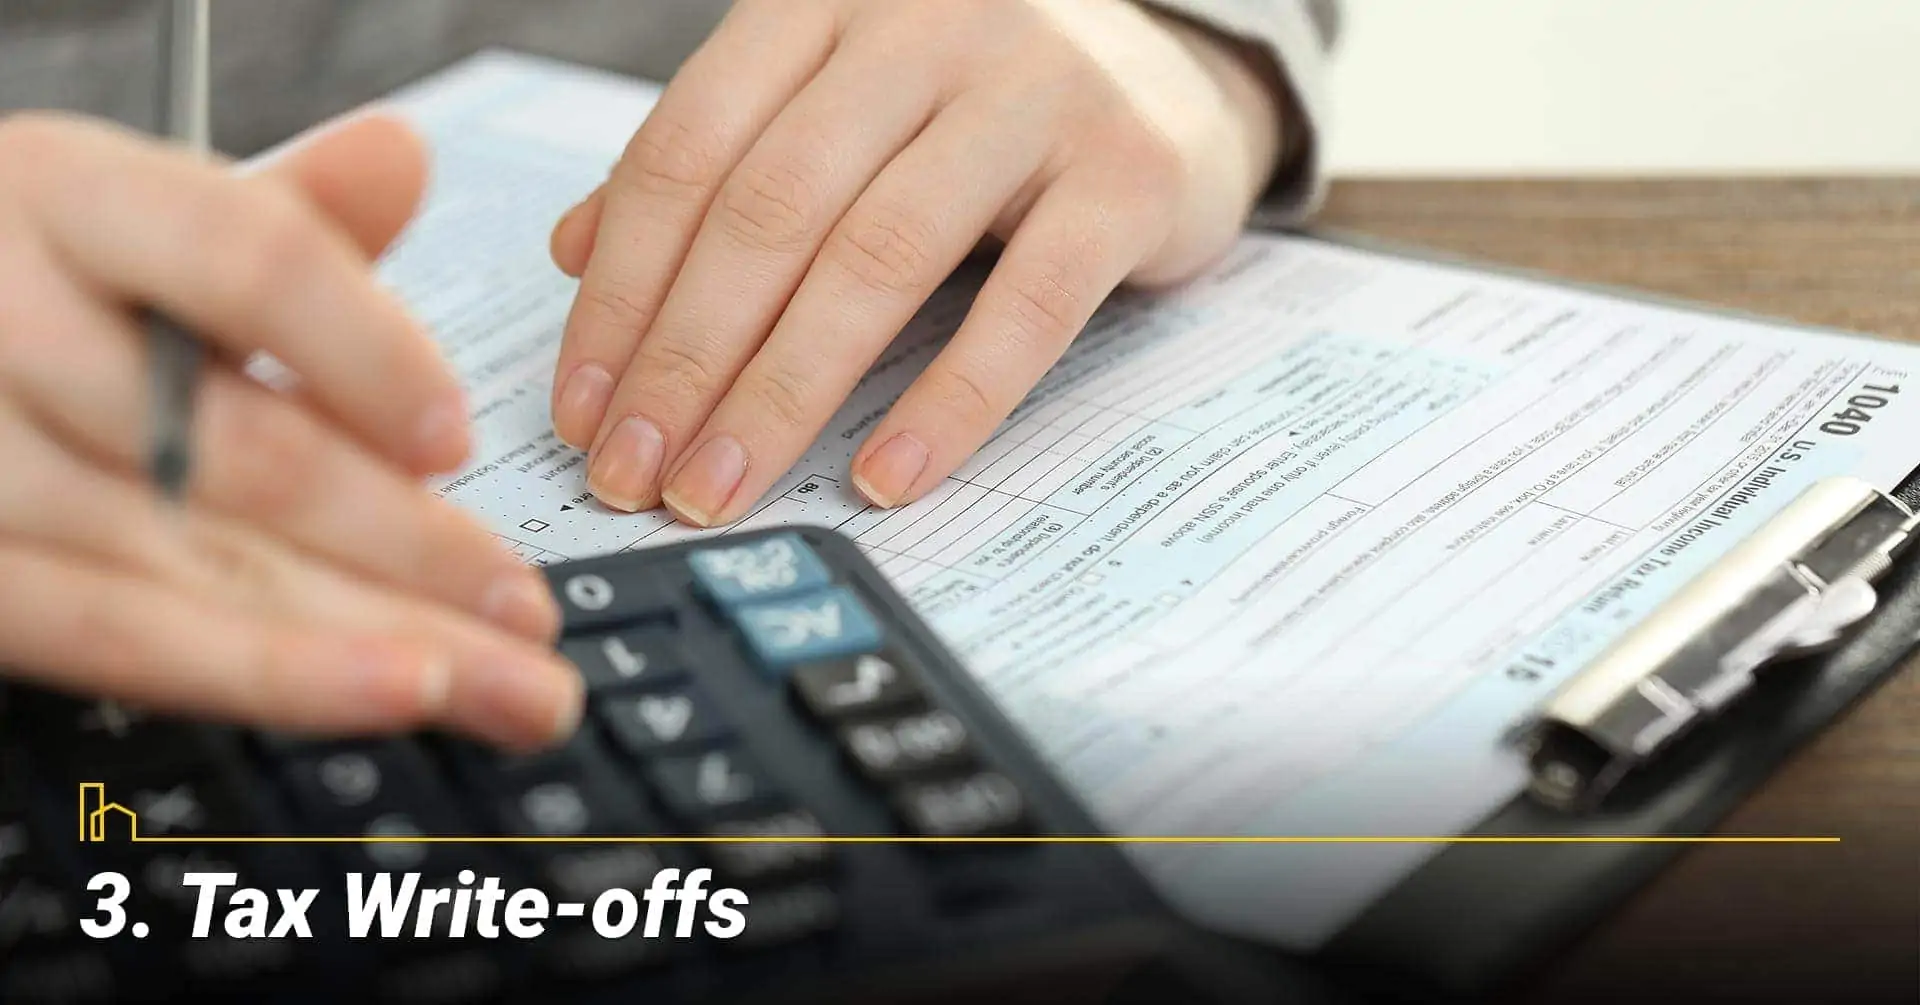 Tax Write-offs, save on taxes